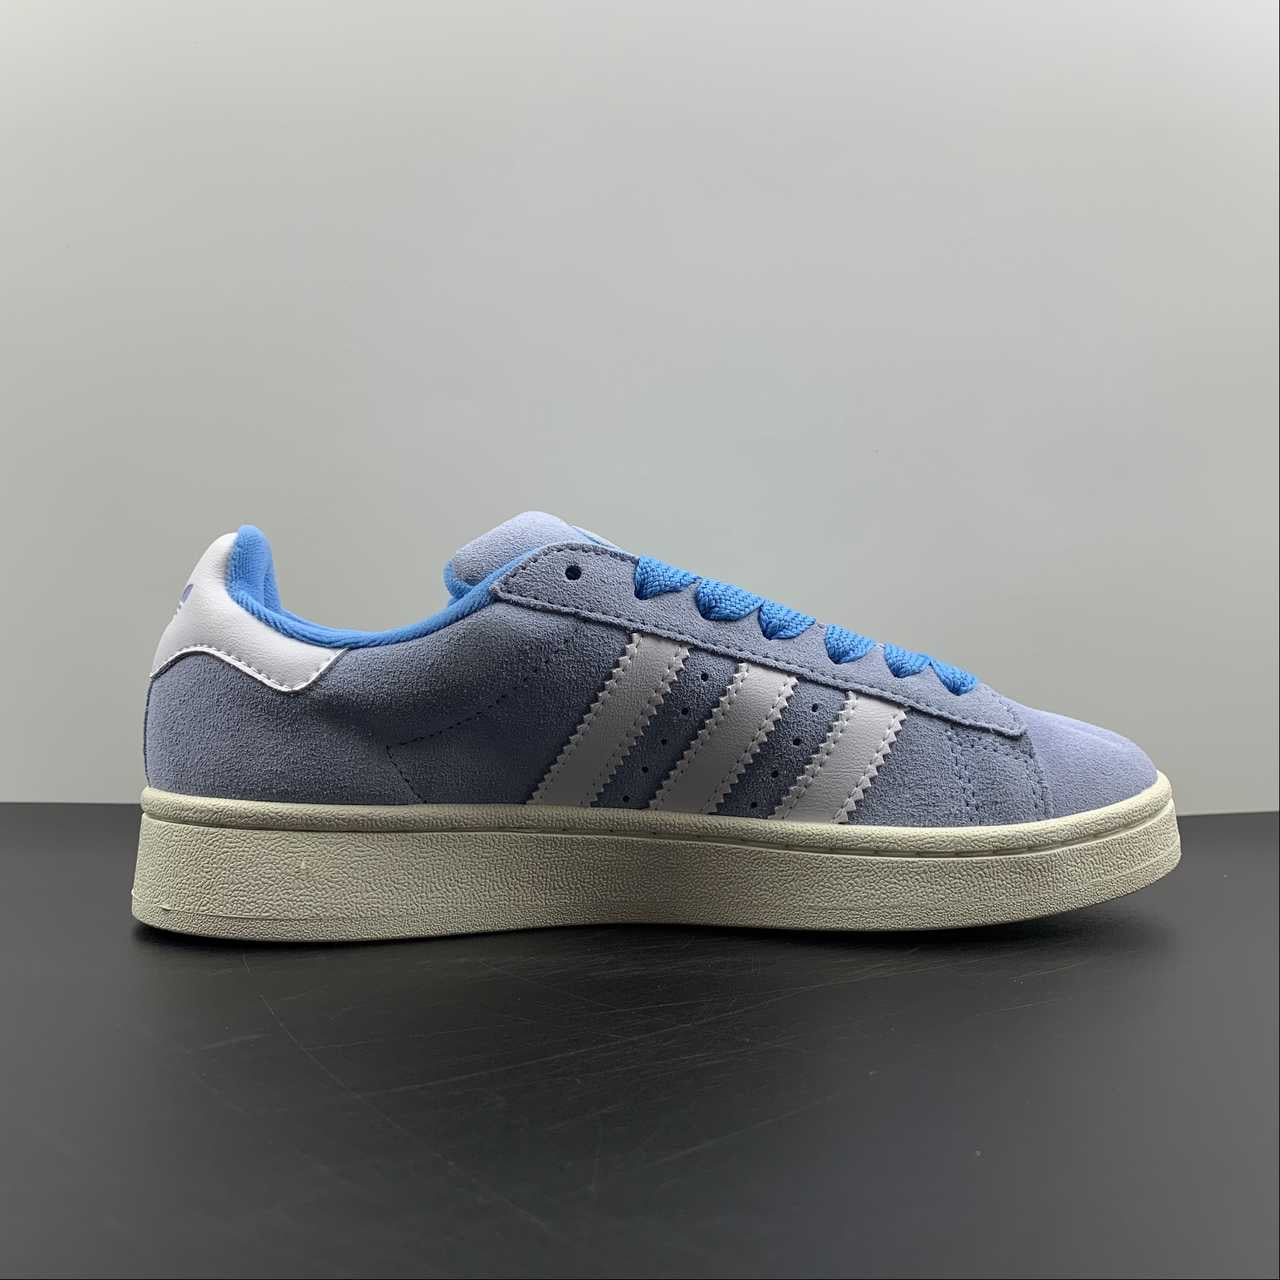 Adidas campus blue shoes